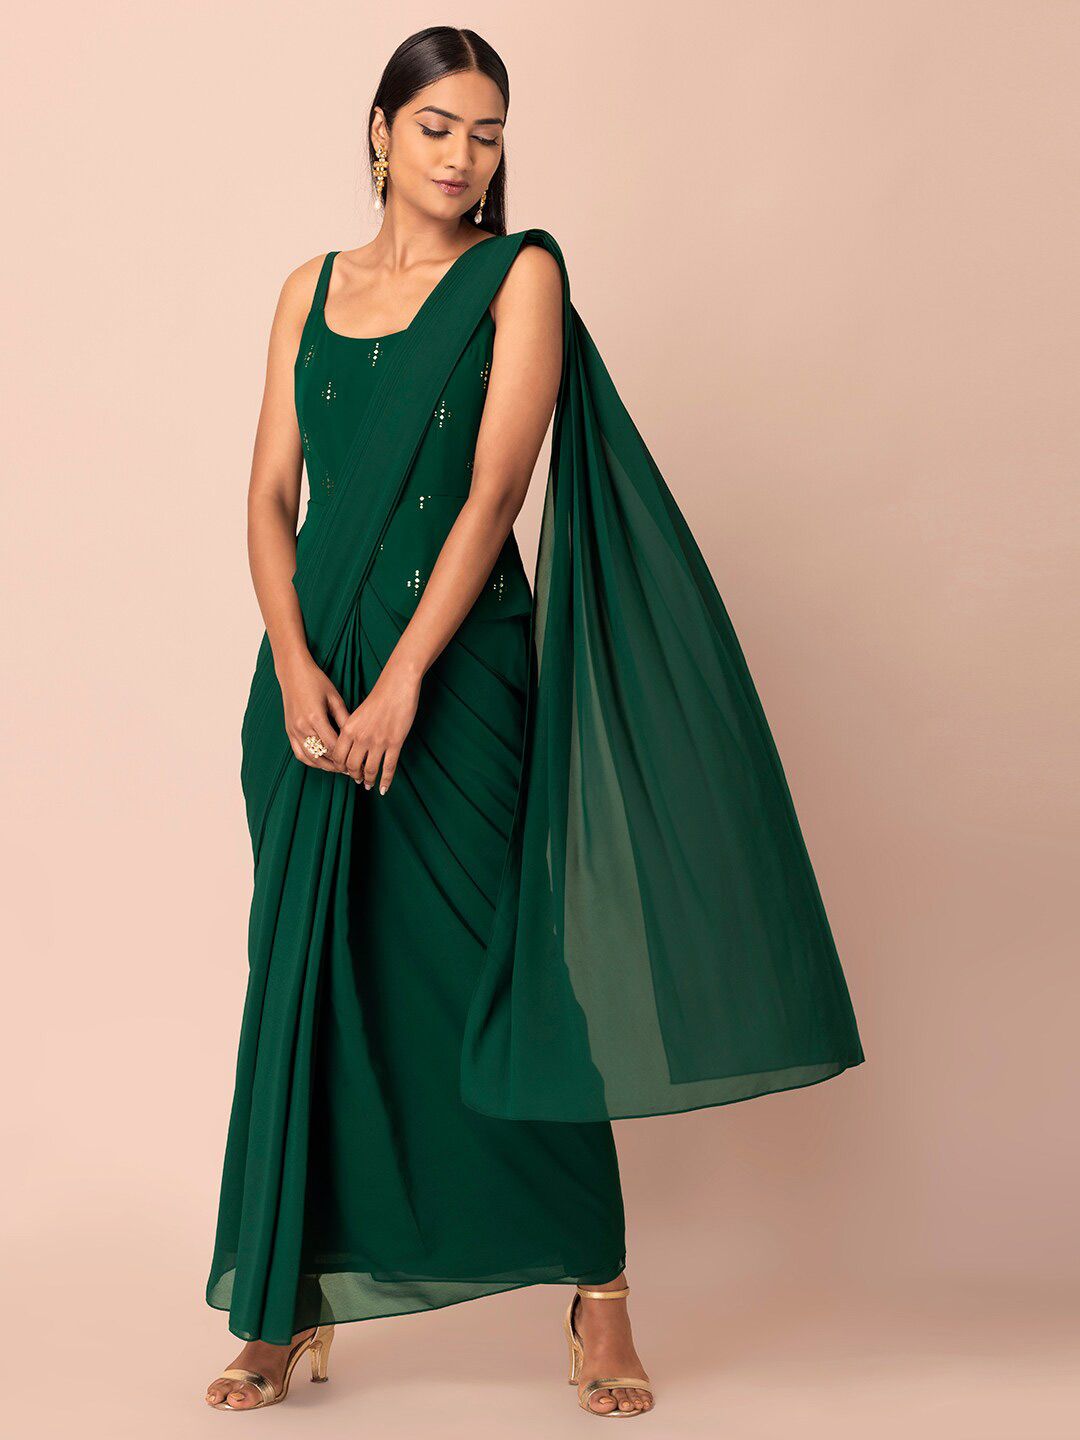 INDYA Green Peplum Pre Draped Ready to Wear Saree With Attached Blouse Price in India